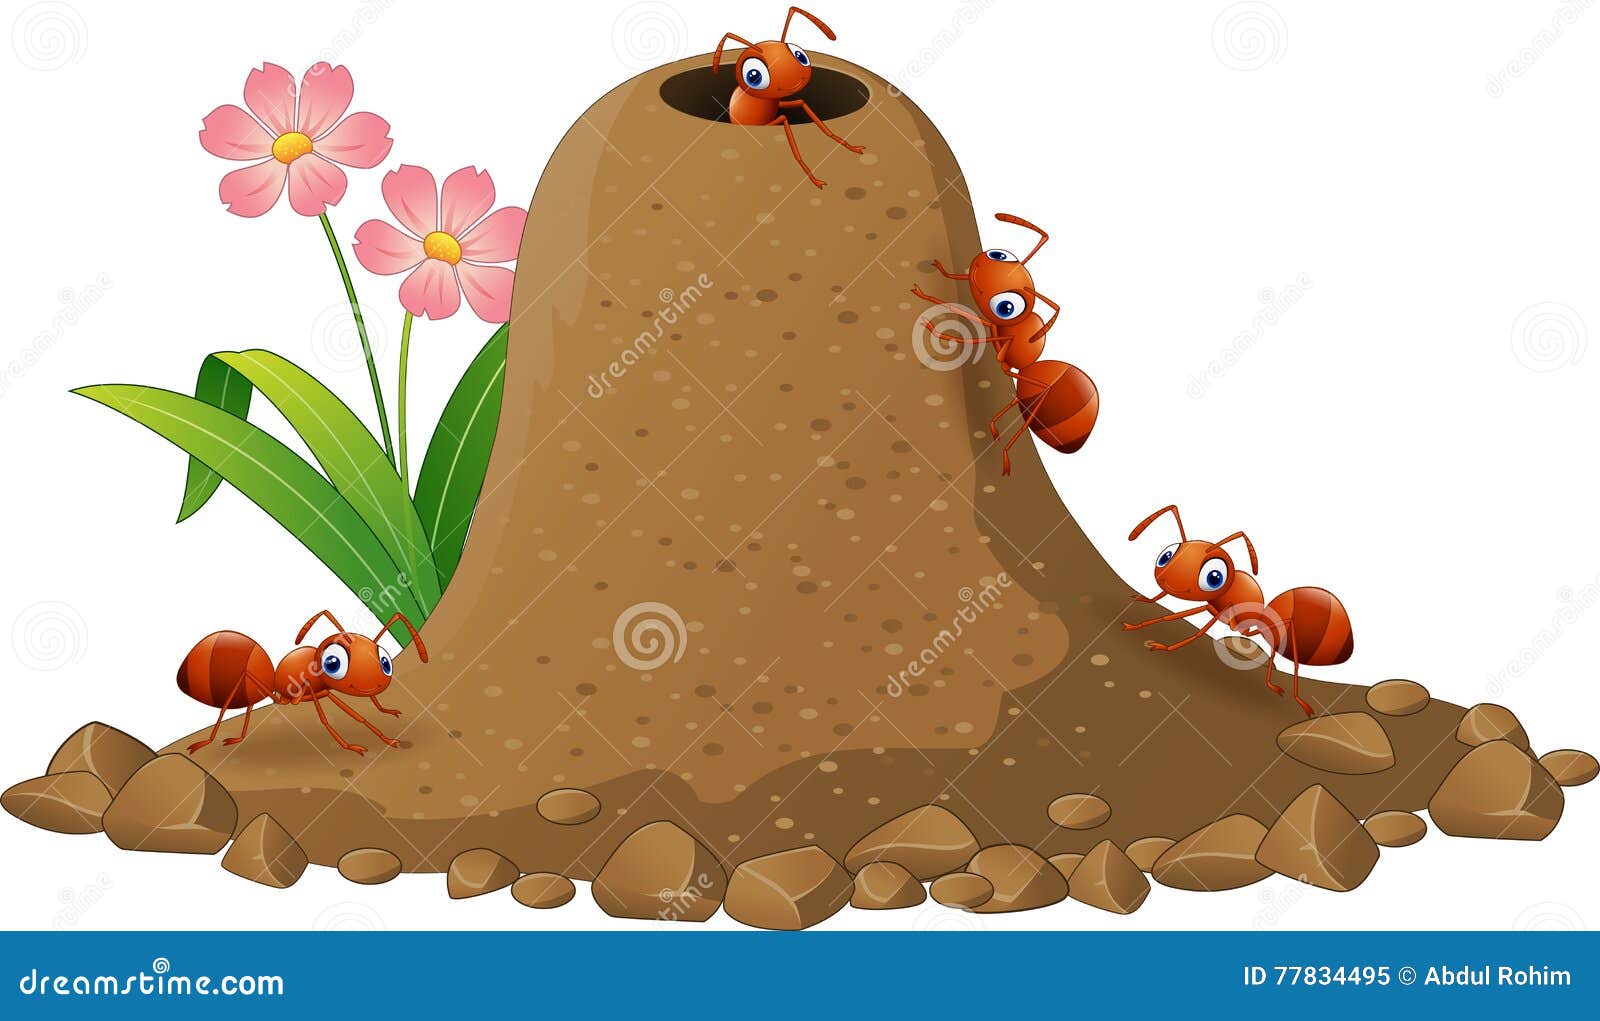 cartoon ants colony and ant hill